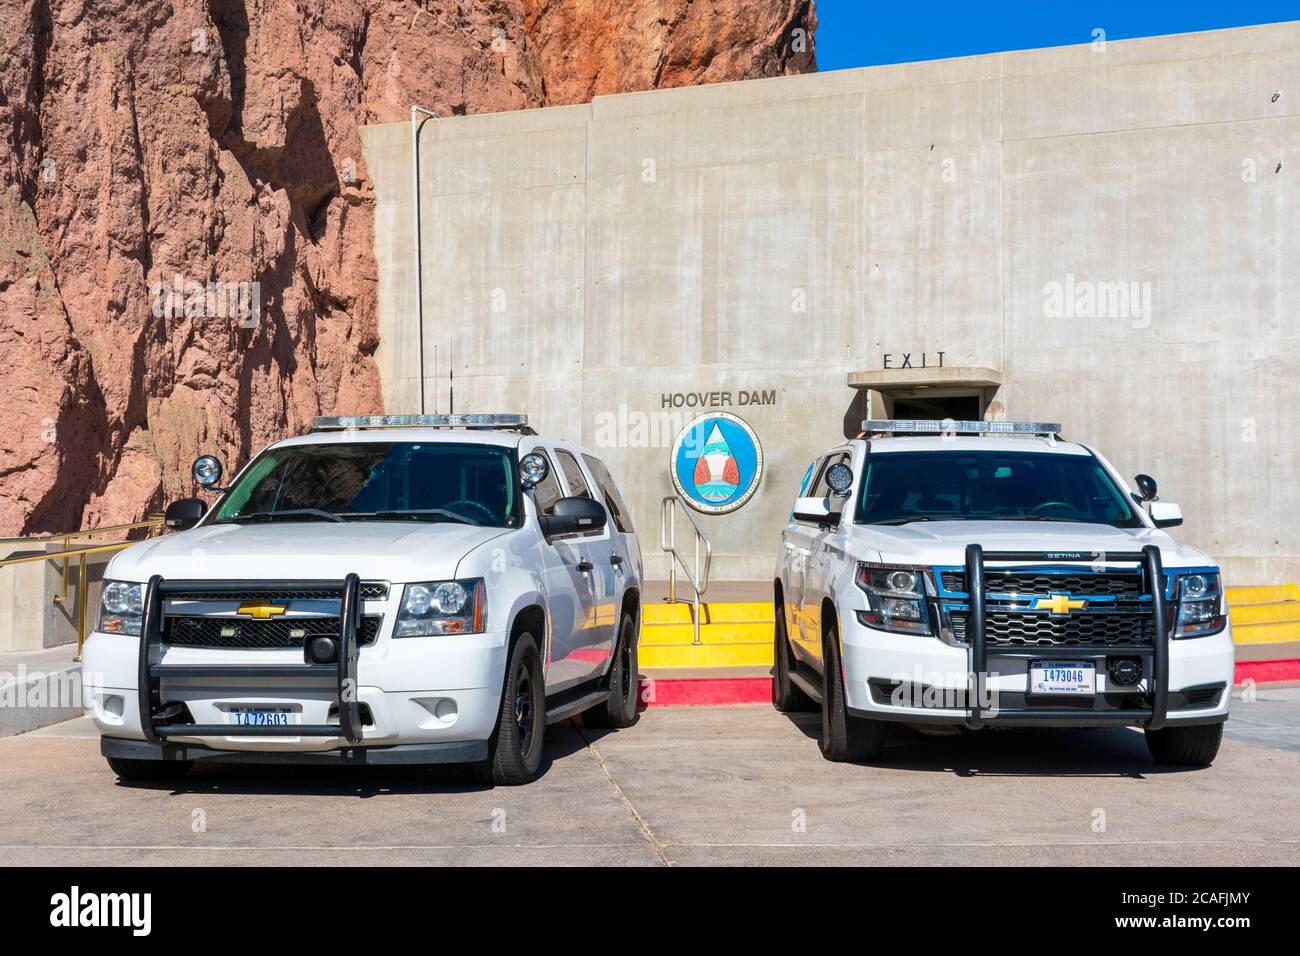 Two Chevrolet SUVs white base model service vehicle wearing U.S. government plates registered to the Department of the Interior parked at Hoover Dam - Stock Photo